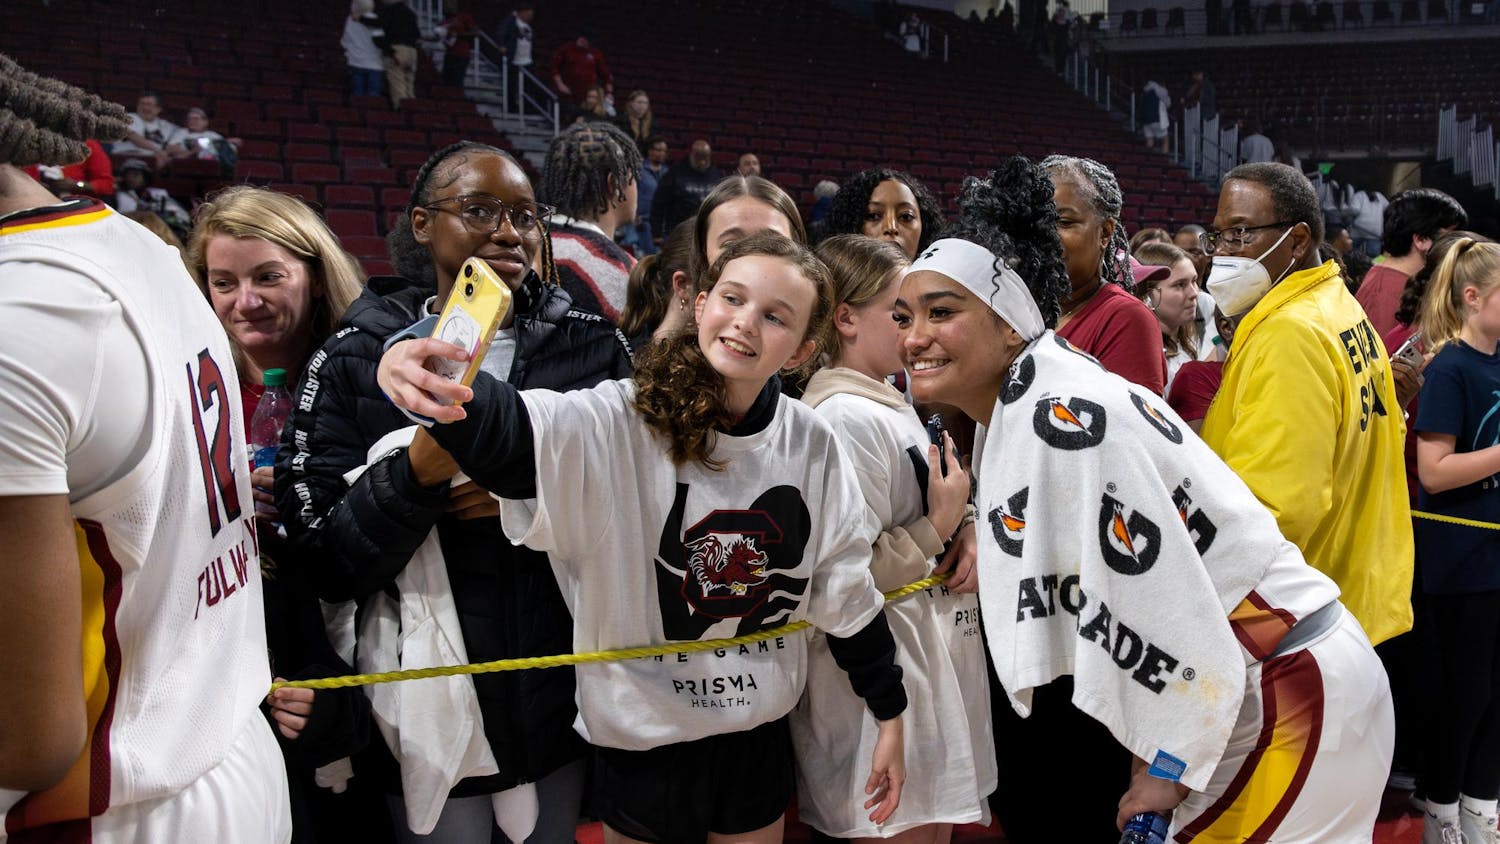 Senior Guard Te-Hina Paopao poses for a selfie with a young fan after the Gamecock 83-65 victory over the Huskies on Feb. 11, 2024. Colonial Life Arena was sold out for the ranked match-up.